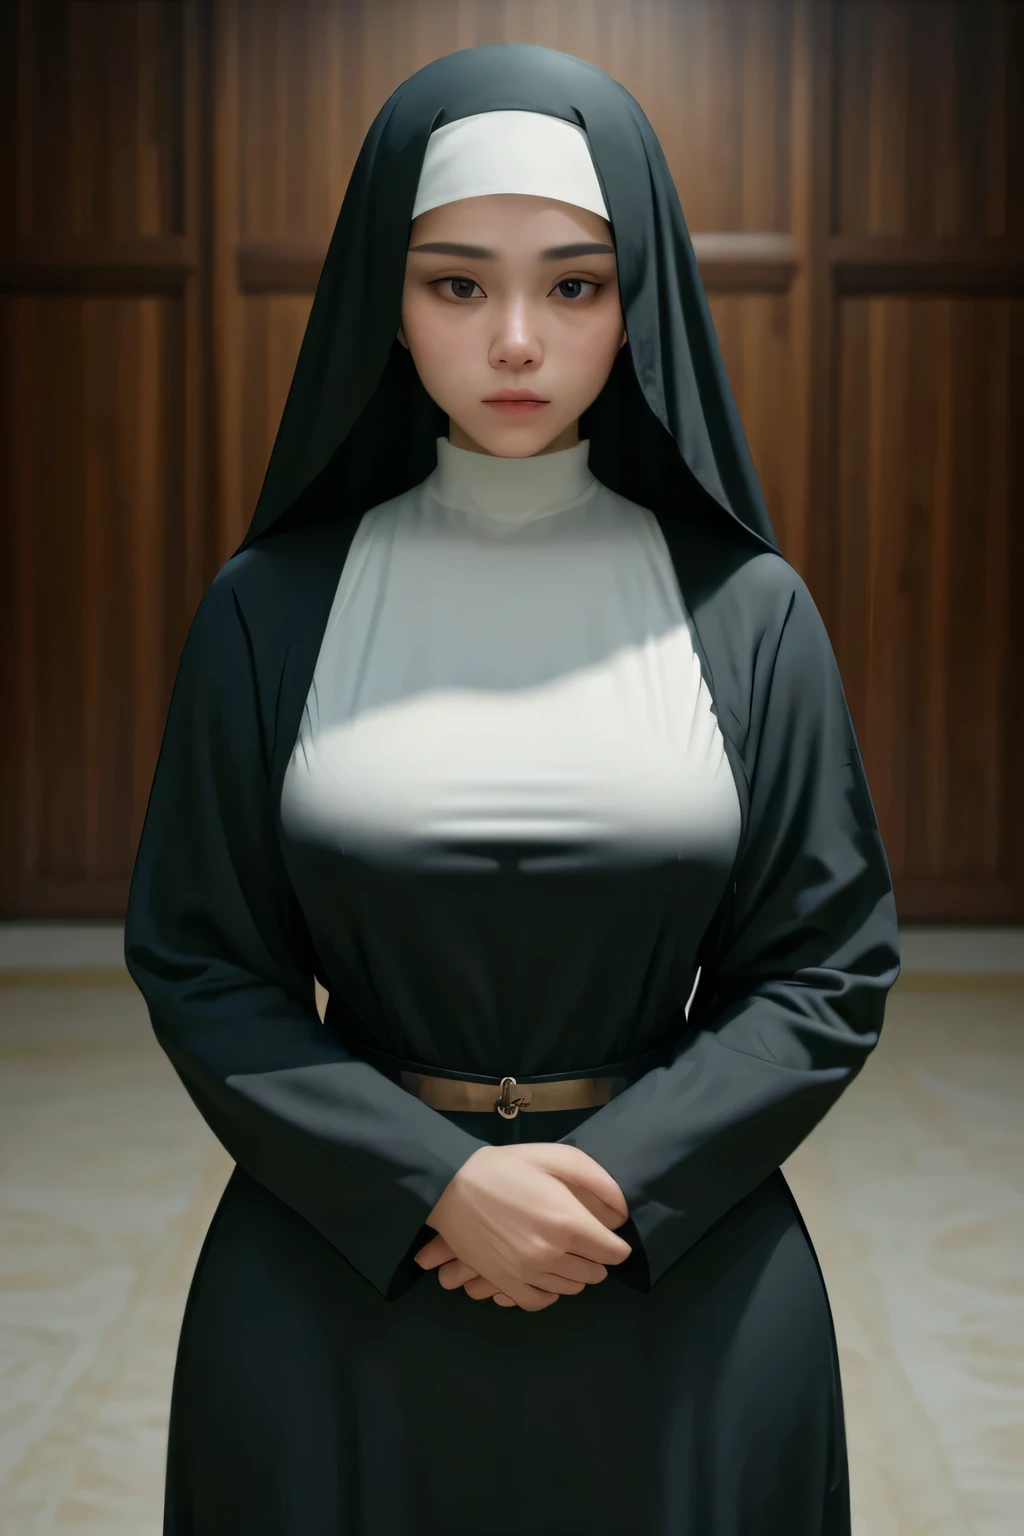 (Masterpiece, Young Nun), (High Quality, Spiritual Figure), (Female Character, Religious Icon), (Detailed Attire, Habit), (Nun's Veil, Covered Head), (Bare Neckline, Modest Plunge), (Natural Complexion, Radiant Skin), (Soft Lighting, Holy Sanctuary), (Realistic Texture, Fabric Wrinkles), (Deep Focus, Close-up Portrait), (Young Face, Innocent Expression), (Hands, Holding Rosary Beads), (Gazing into the Distance, Contemplating), (Serene Environment, Monastery), , full body shot